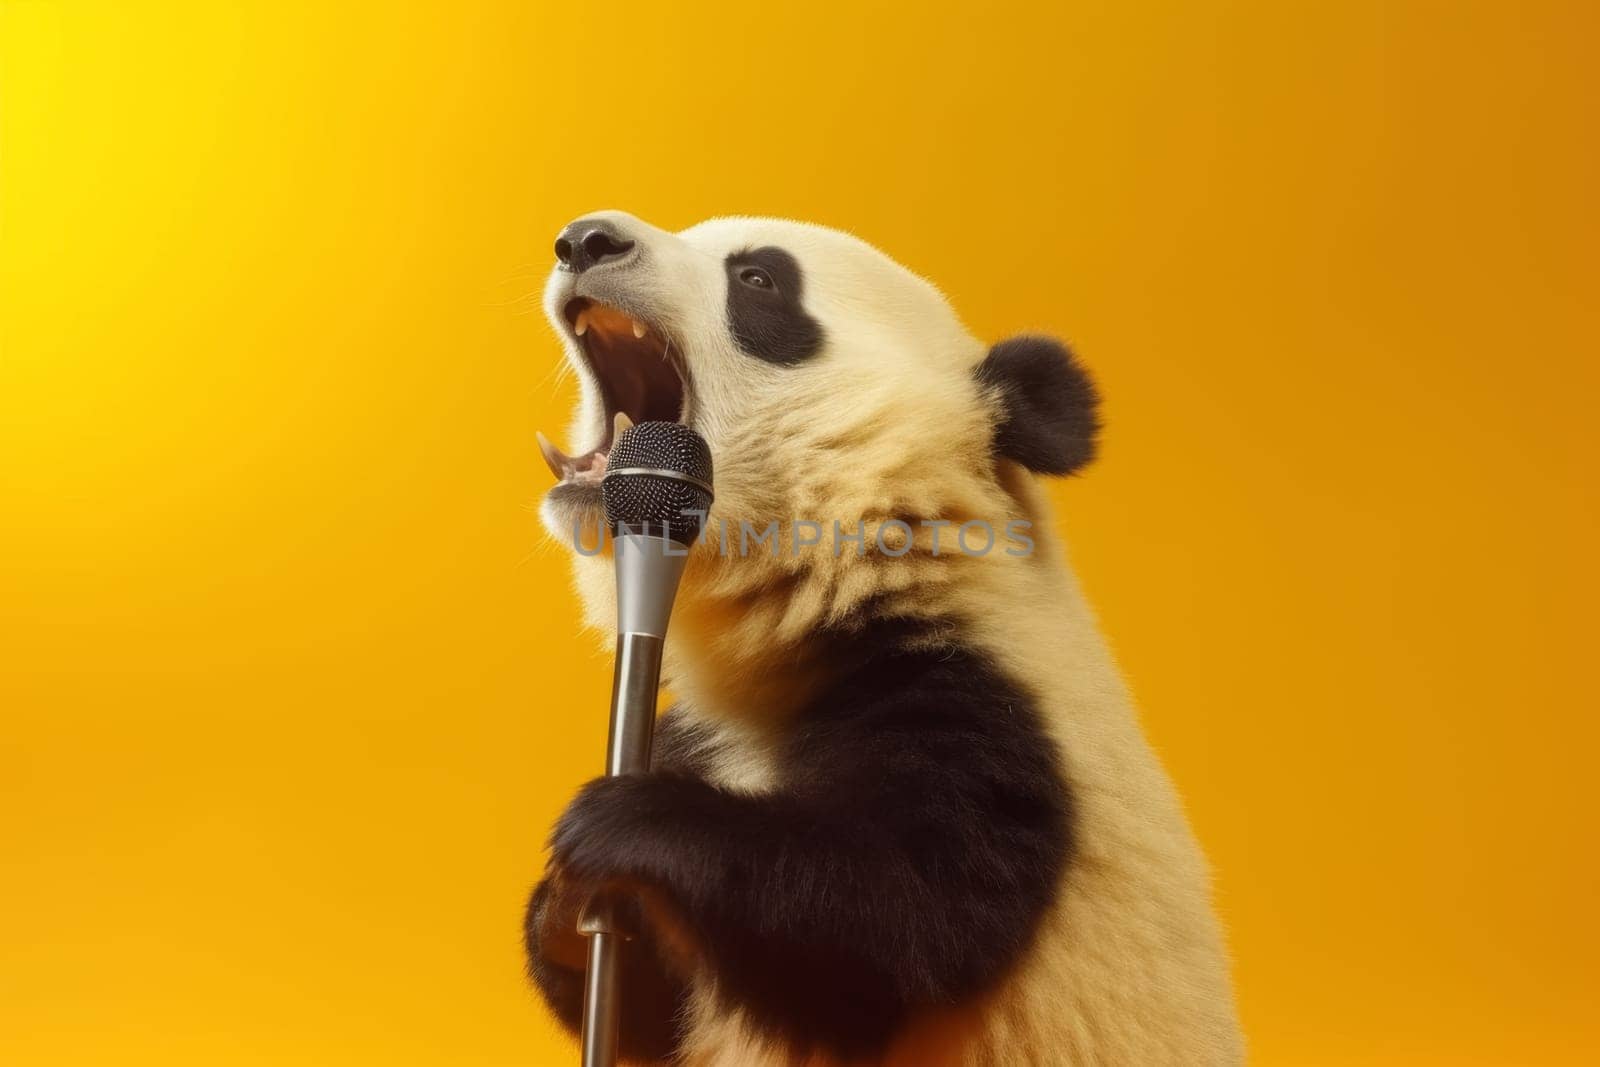 Artistic portrayal of a panda seemingly singing into a microphone, a fun and imaginative take on wildlife with a vibrant yellow background.